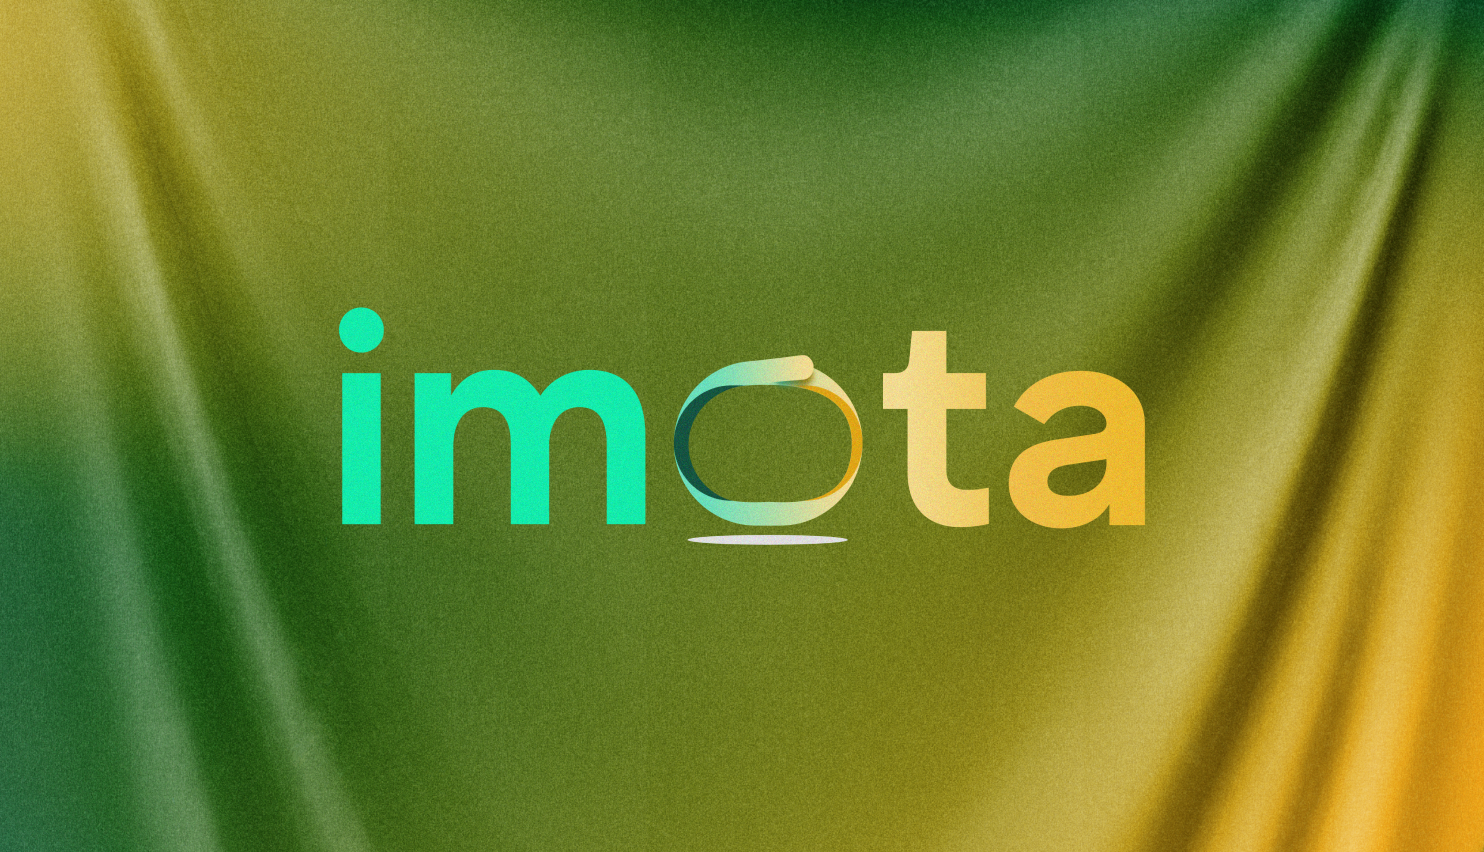 Imota changes to new face, ready to lead in decentralized earning era